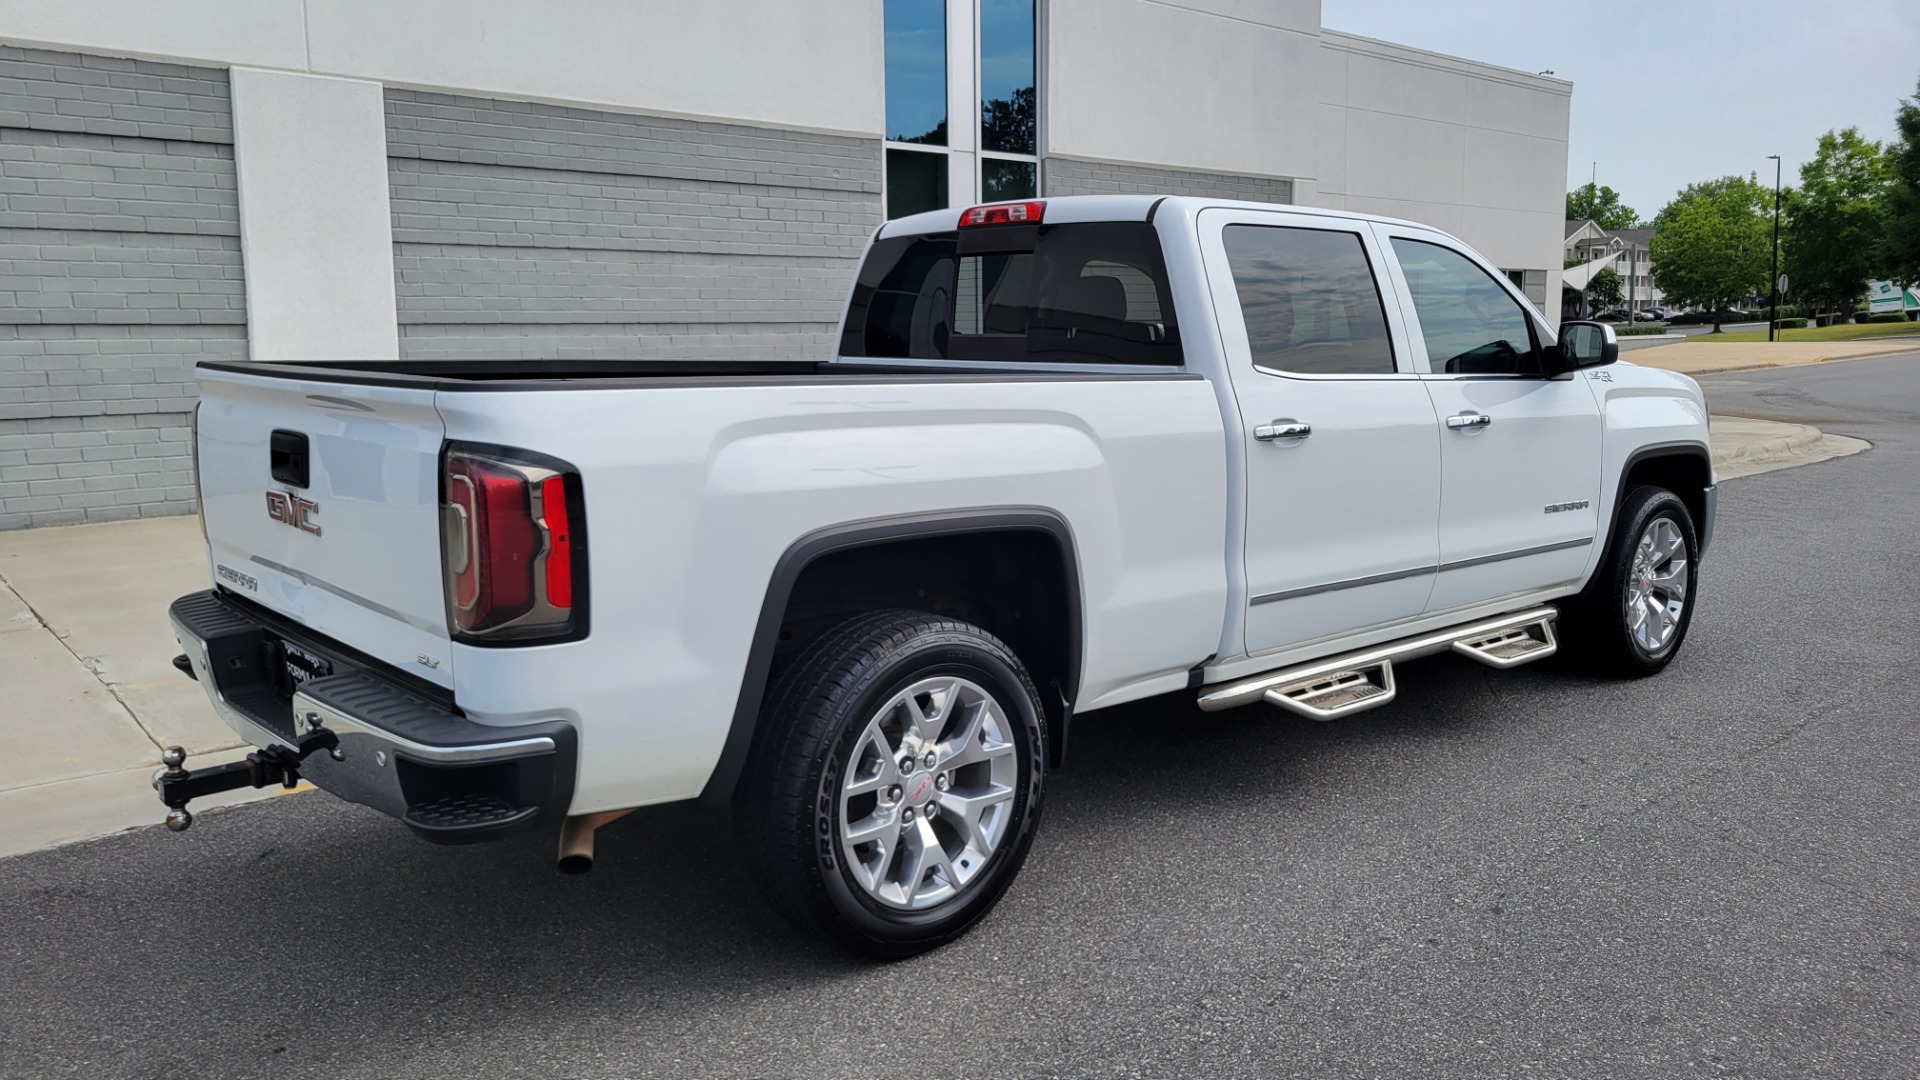 Used 2016 GMC SIERRA 1500 SLT 4X4 Z71 CREWCAB / NAV / BOSE / HTS STS & STRNG WHL / CAMERA for sale $29,695 at Formula Imports in Charlotte NC 28227 8